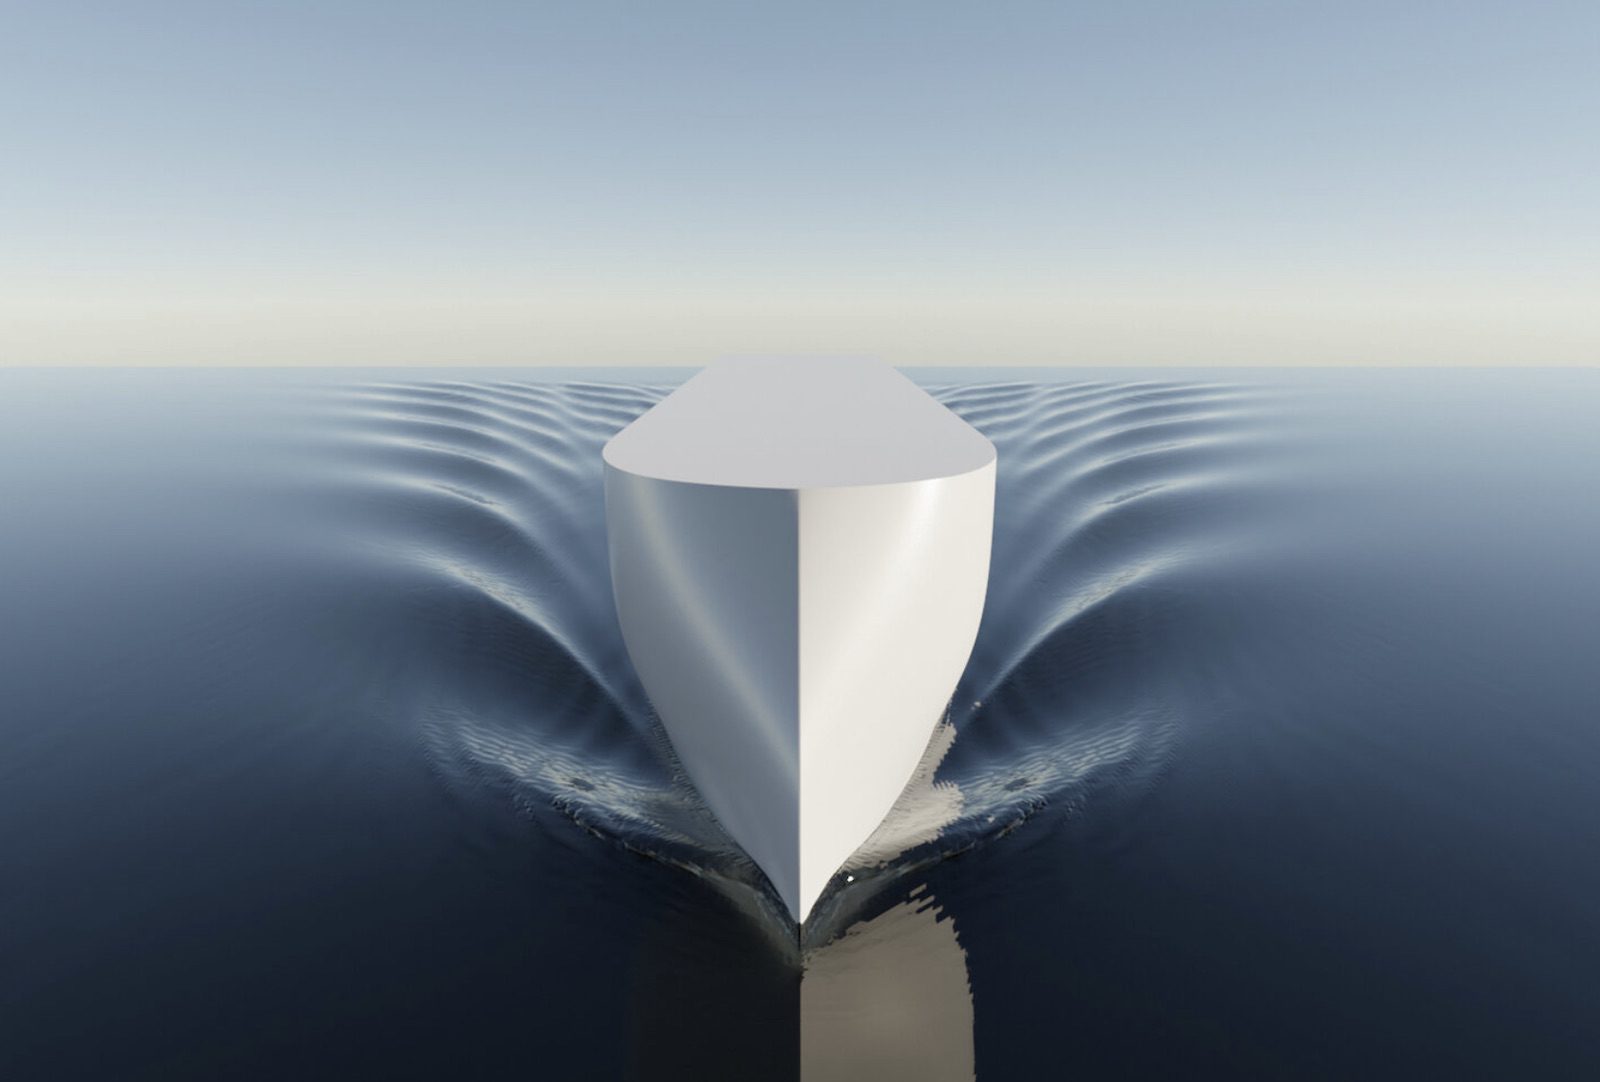 Ulstein to Design Non-Fossil Fuel Containership for Norwegian Startup